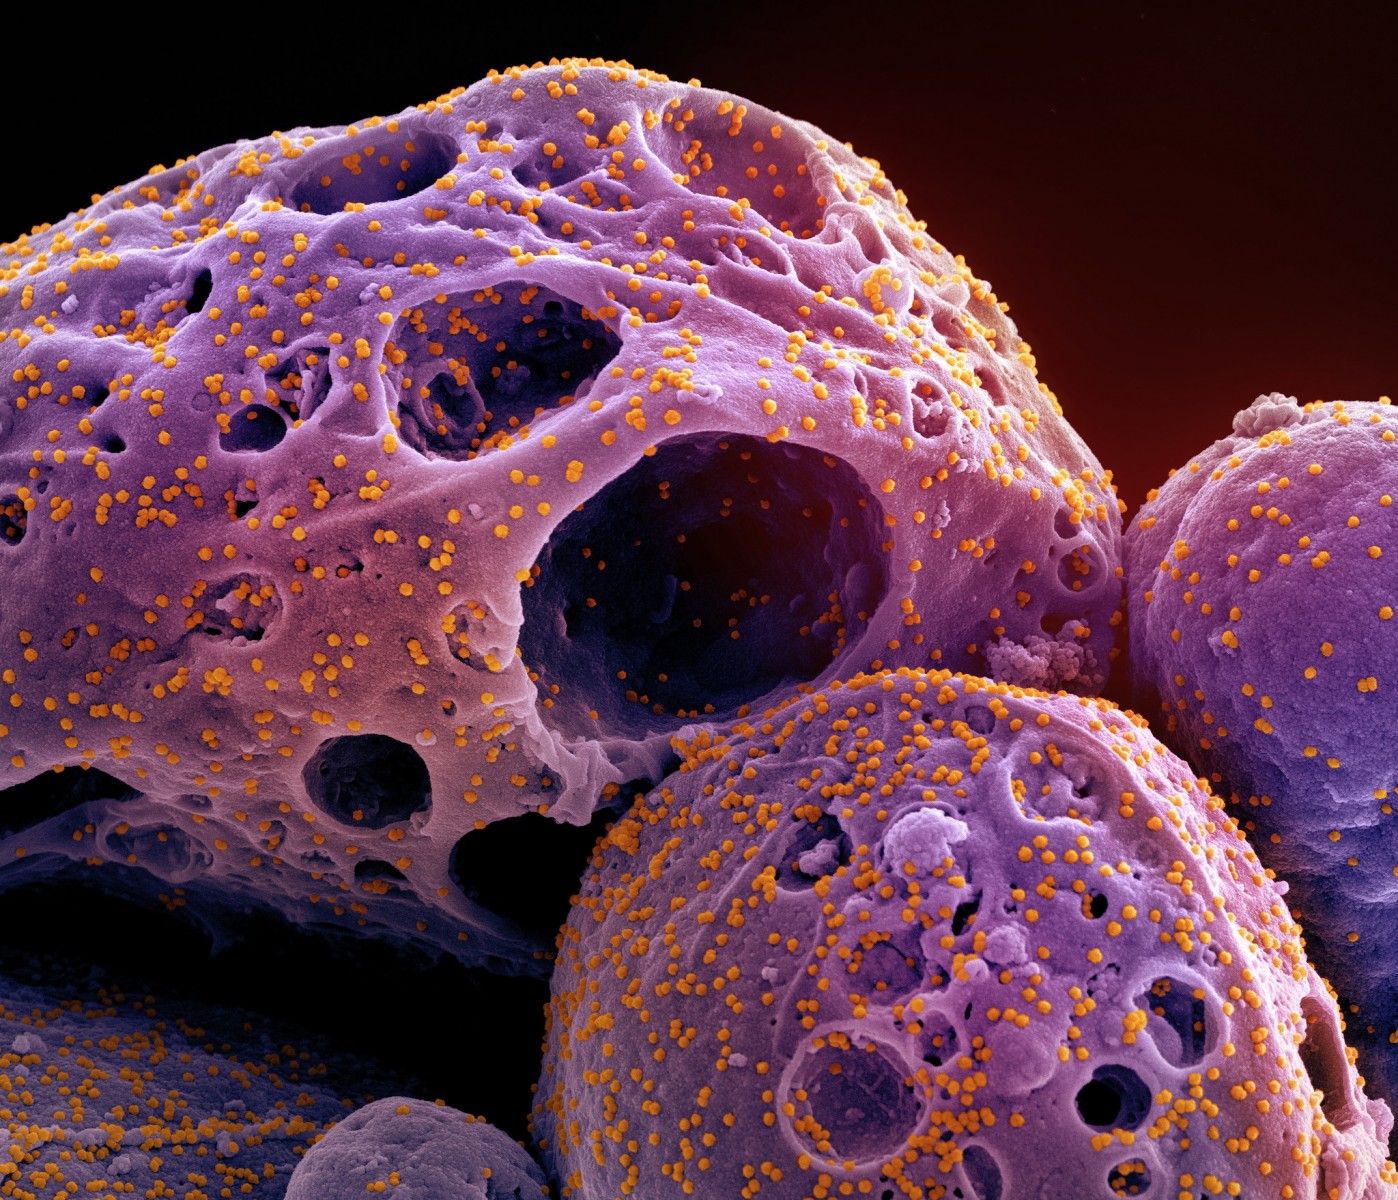 Scanning electron micrograph of a cell (purple) infected with the omicron strain of SARS-CoV-2 virus particles (orange), isolated from a patient sample and colorized.